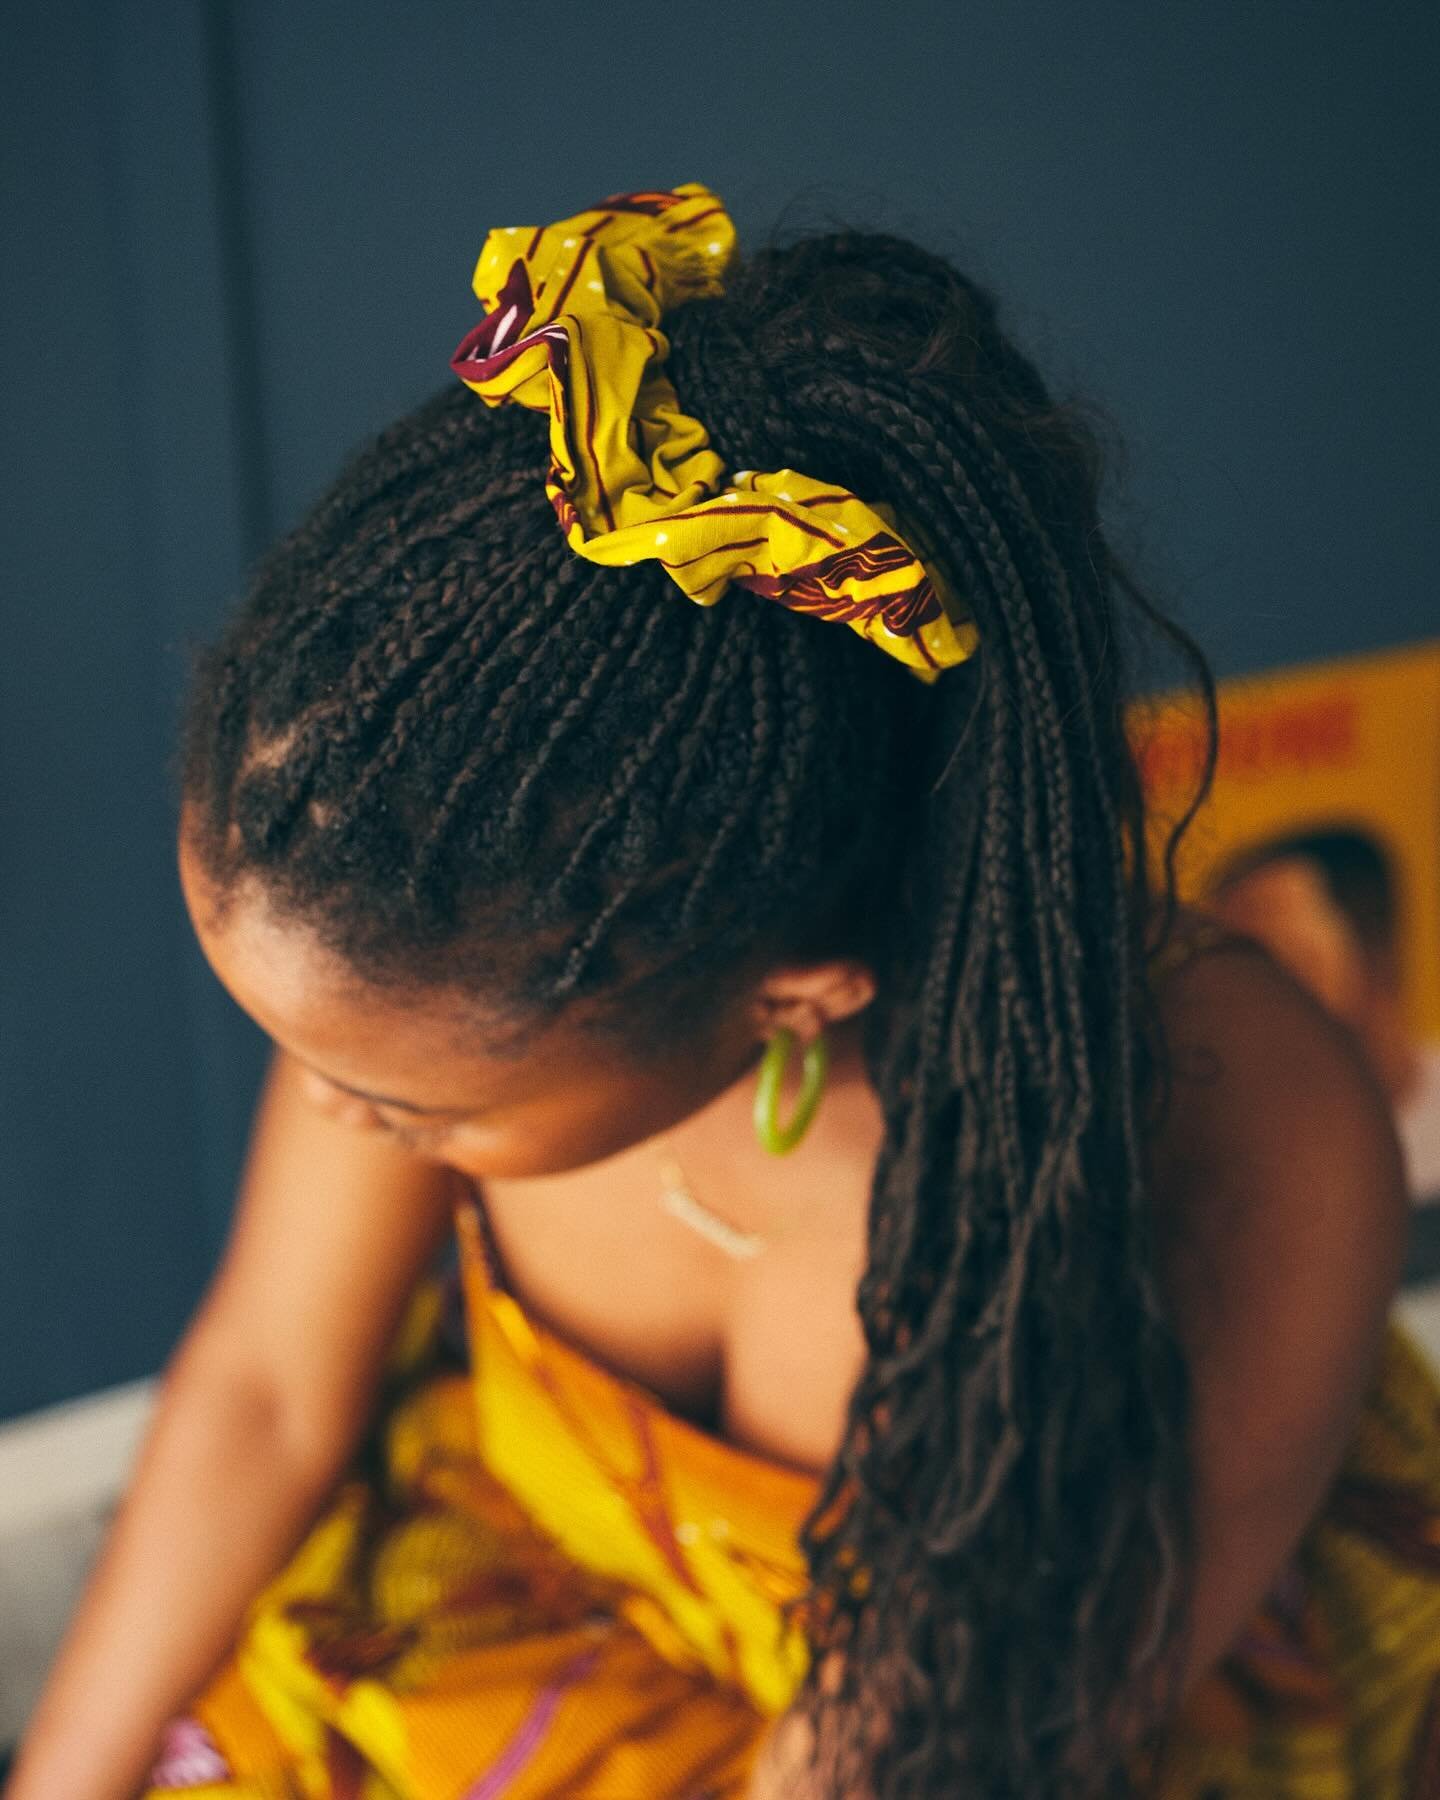 Easiest way to brighten up the day - with a wax print scrunchy of course! Made in Ghana from production scraps to reduce waste.